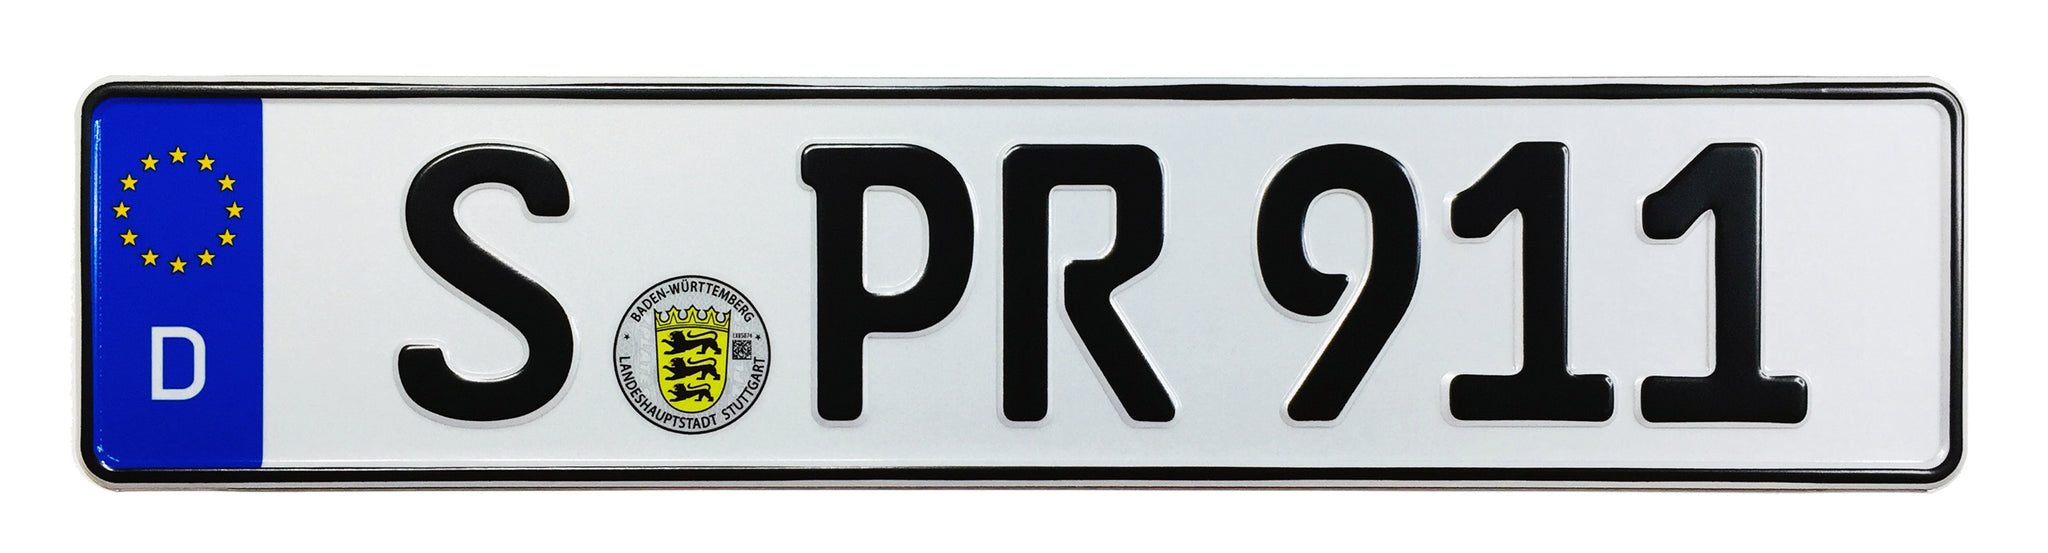 front license plate